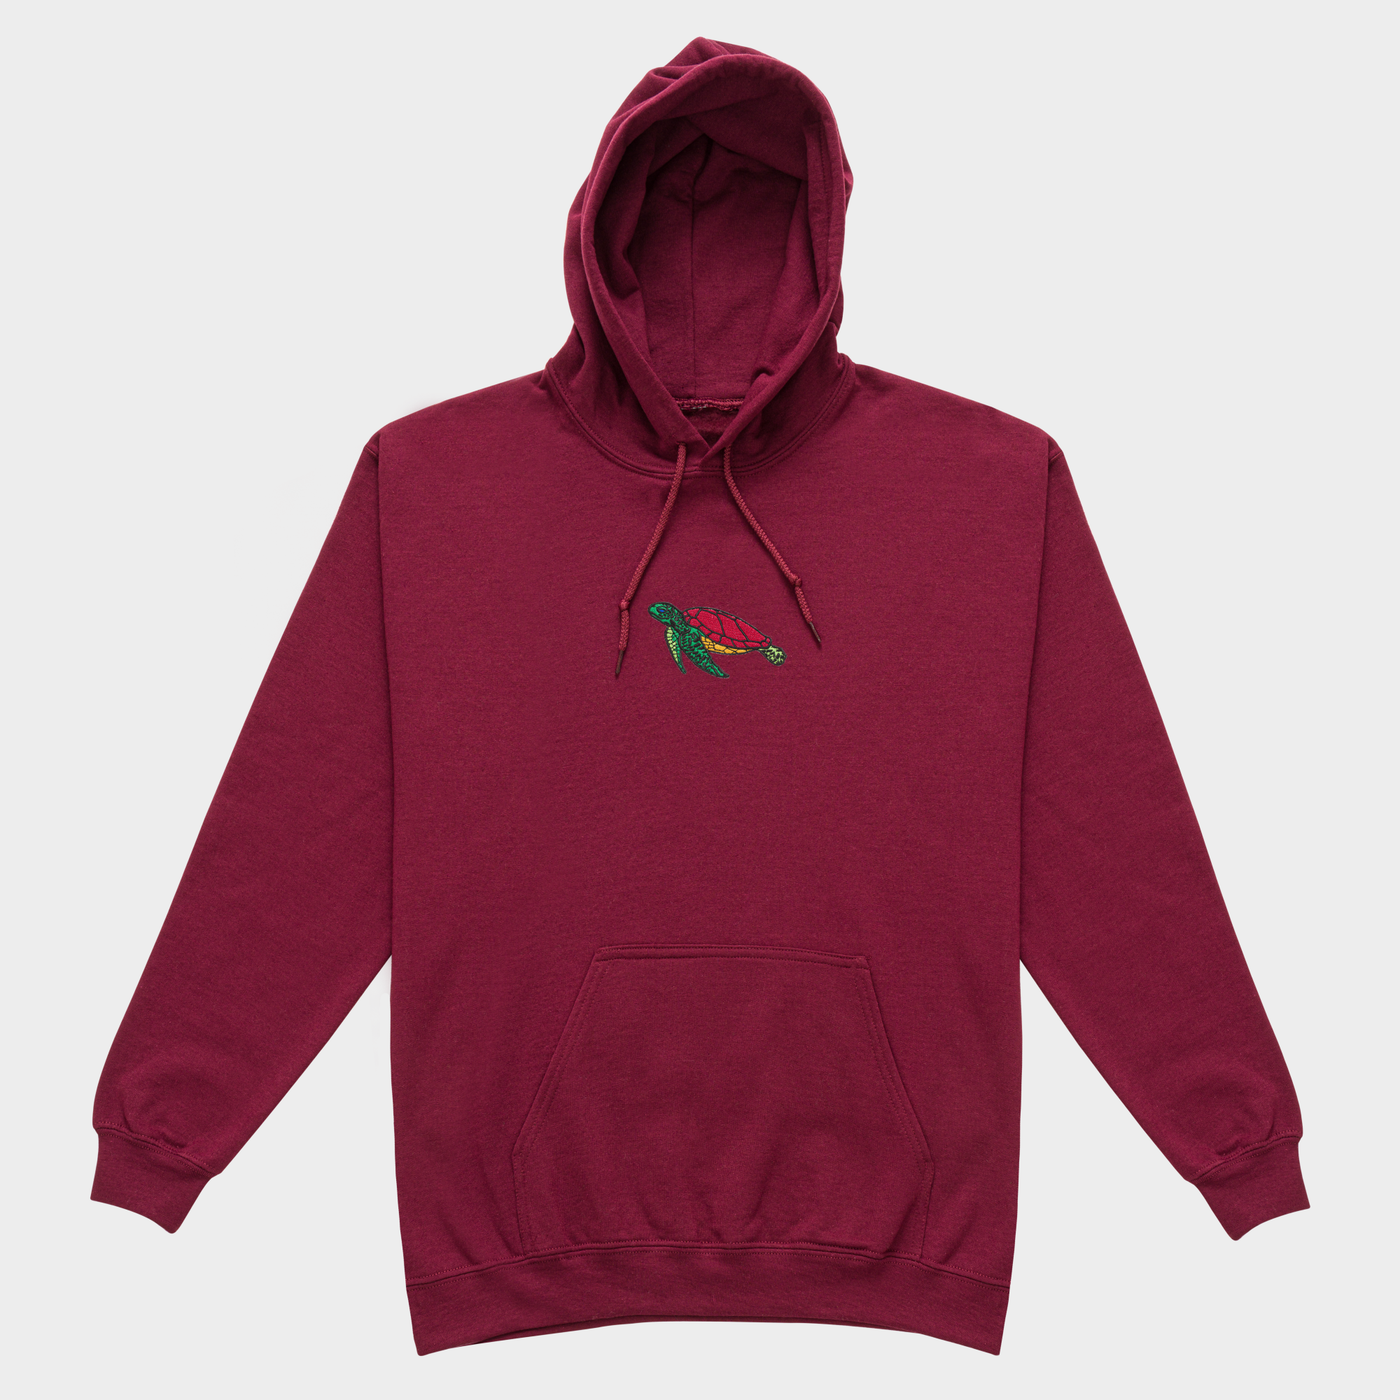 Bobby's Planet Men's Embroidered Sea Turtle Hoodie from Seven Seas Fish Animals Collection in Maroon Color#color_maroon